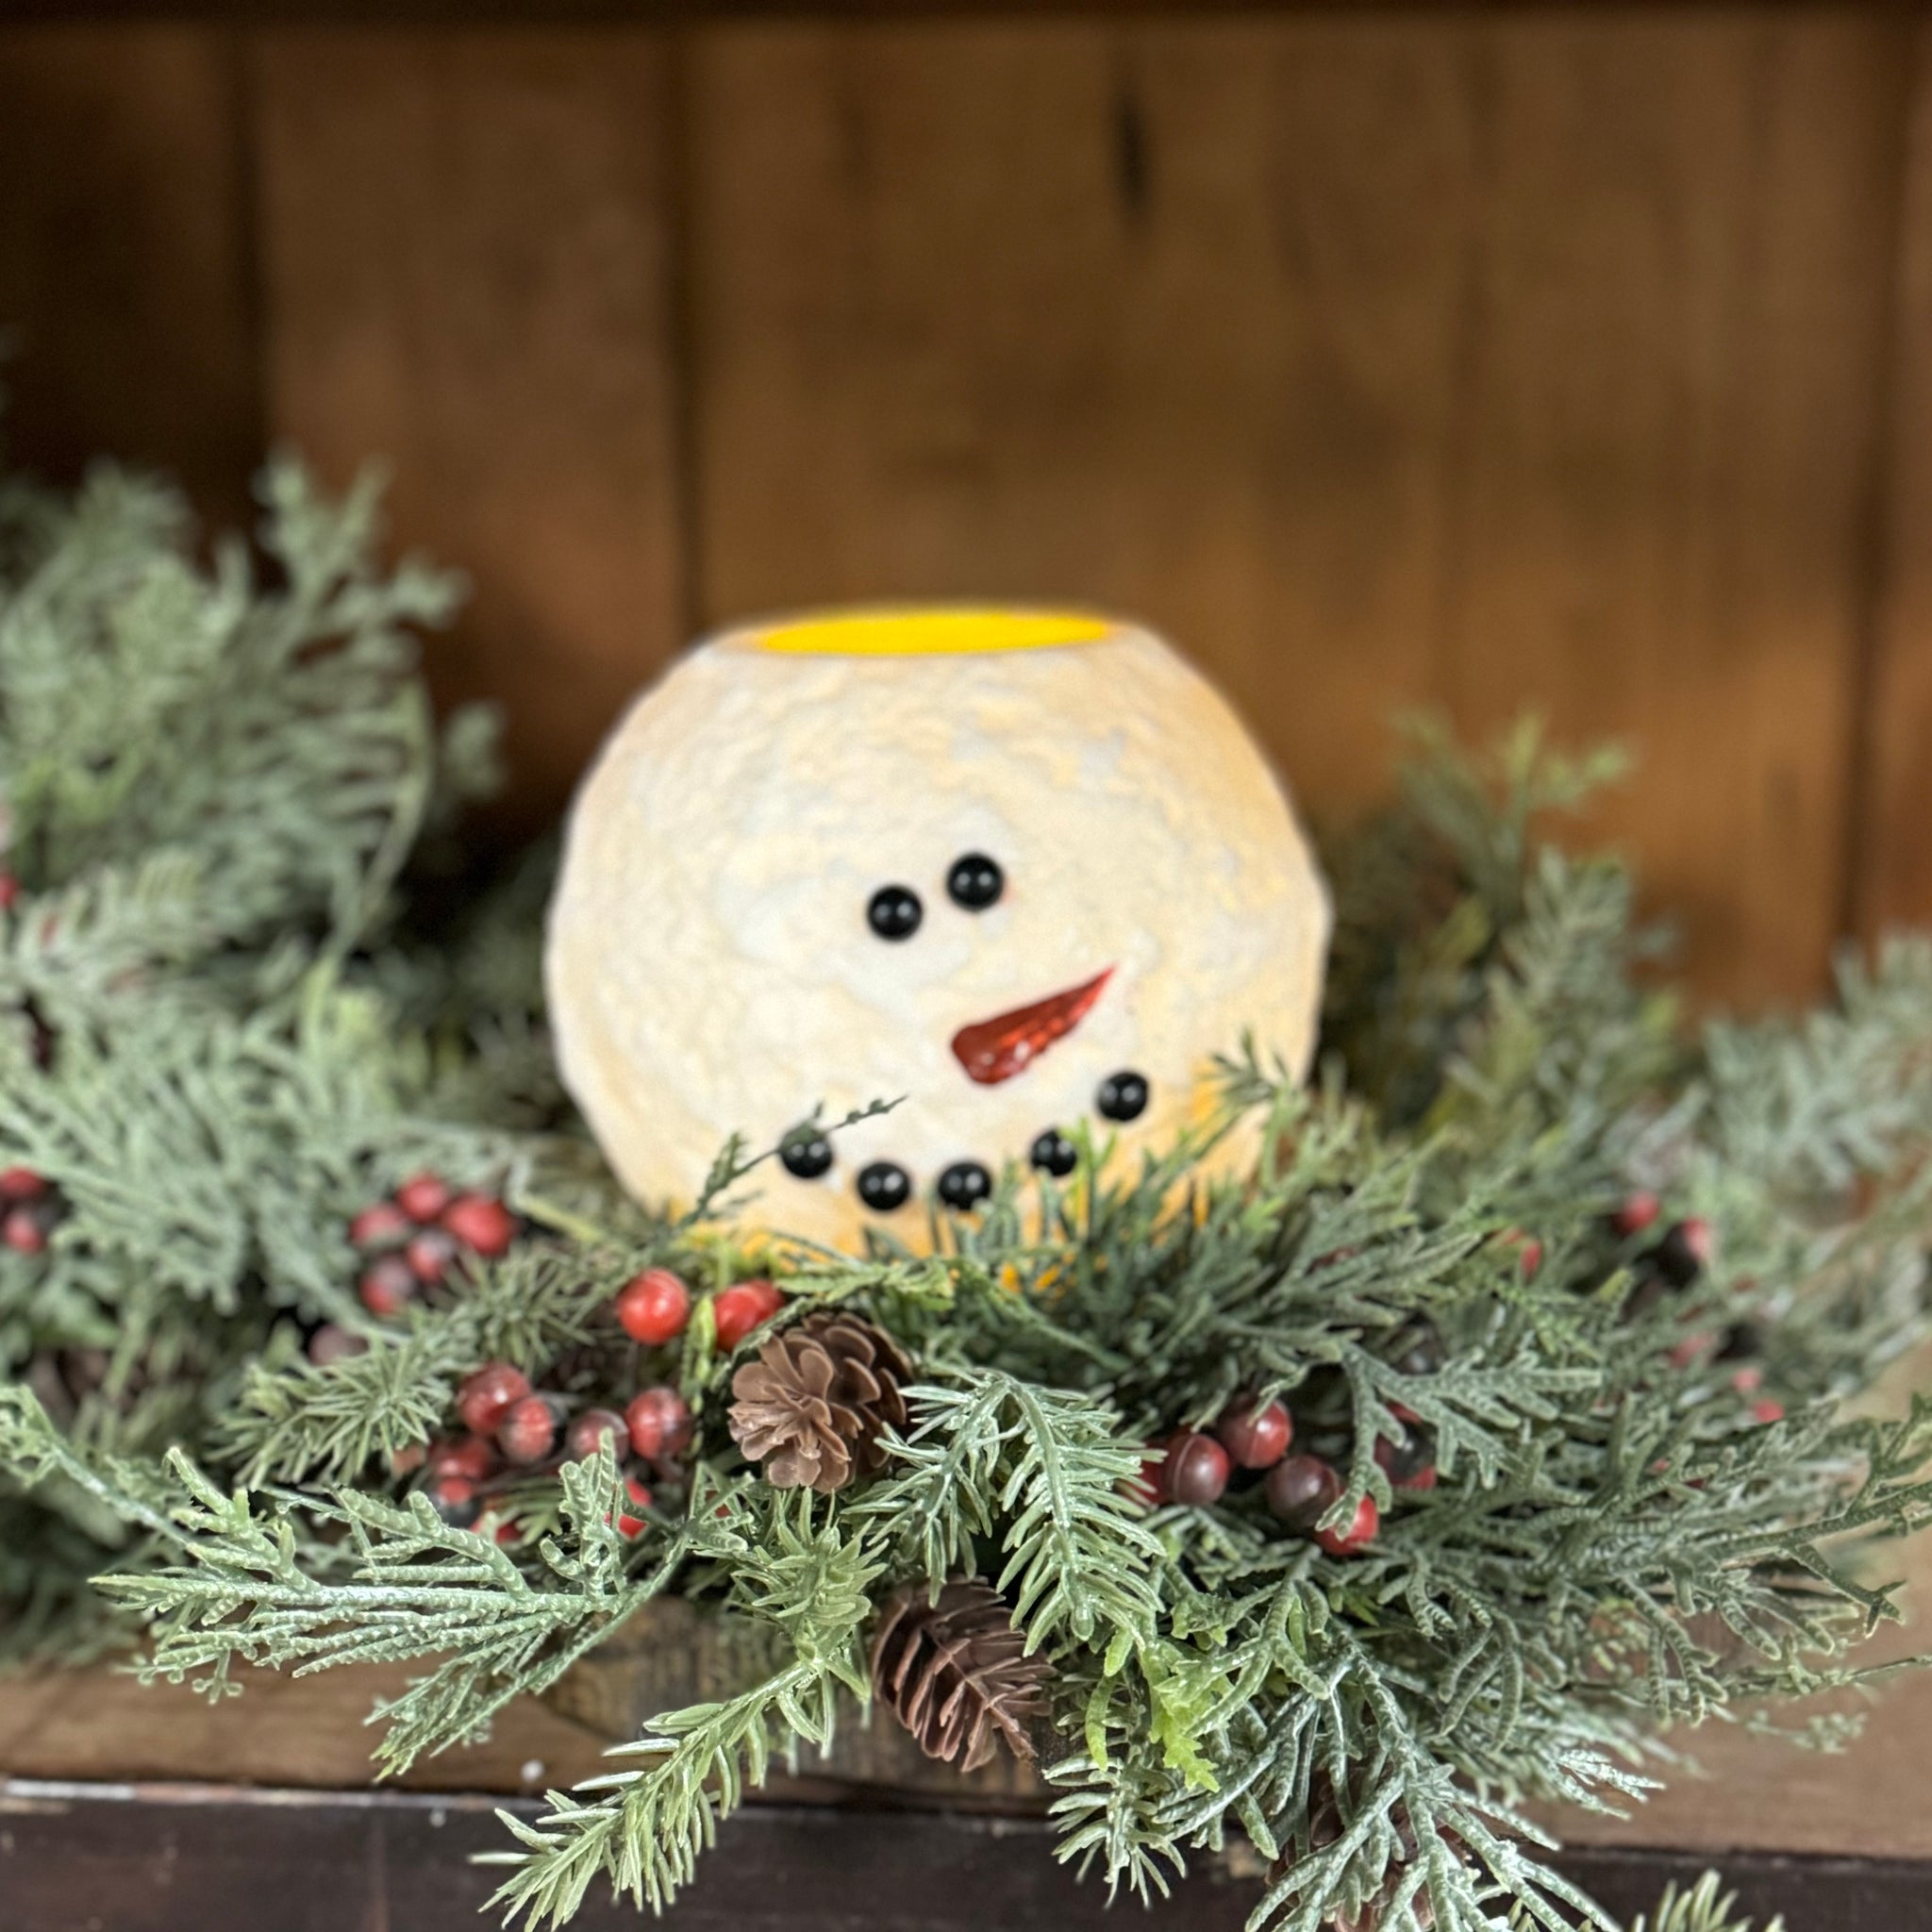 Frank the Round Snowman Candle - 6 Hour Timer Feature